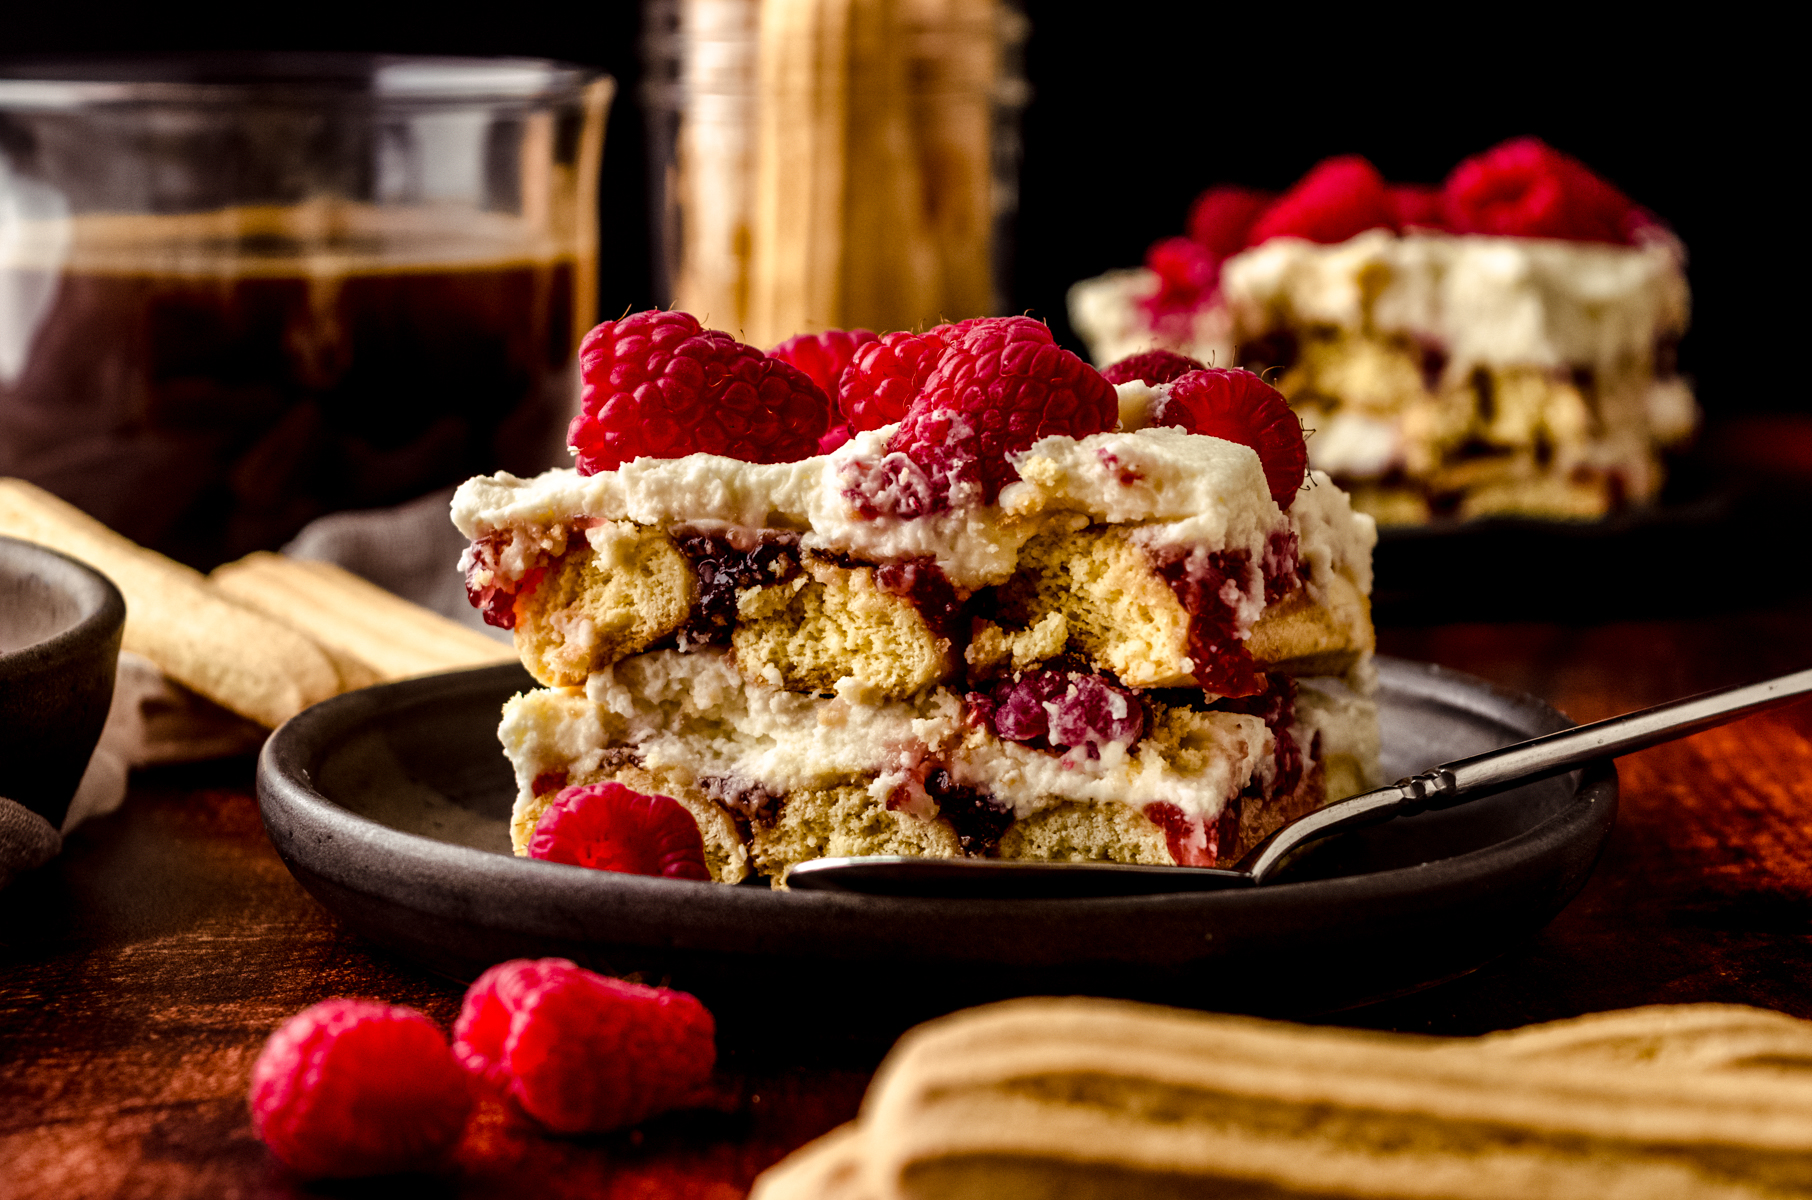 A slice of raspberry tiramisu on a plate with a fork. There is a cup of coffee and a jar of ladyfingers in the background.